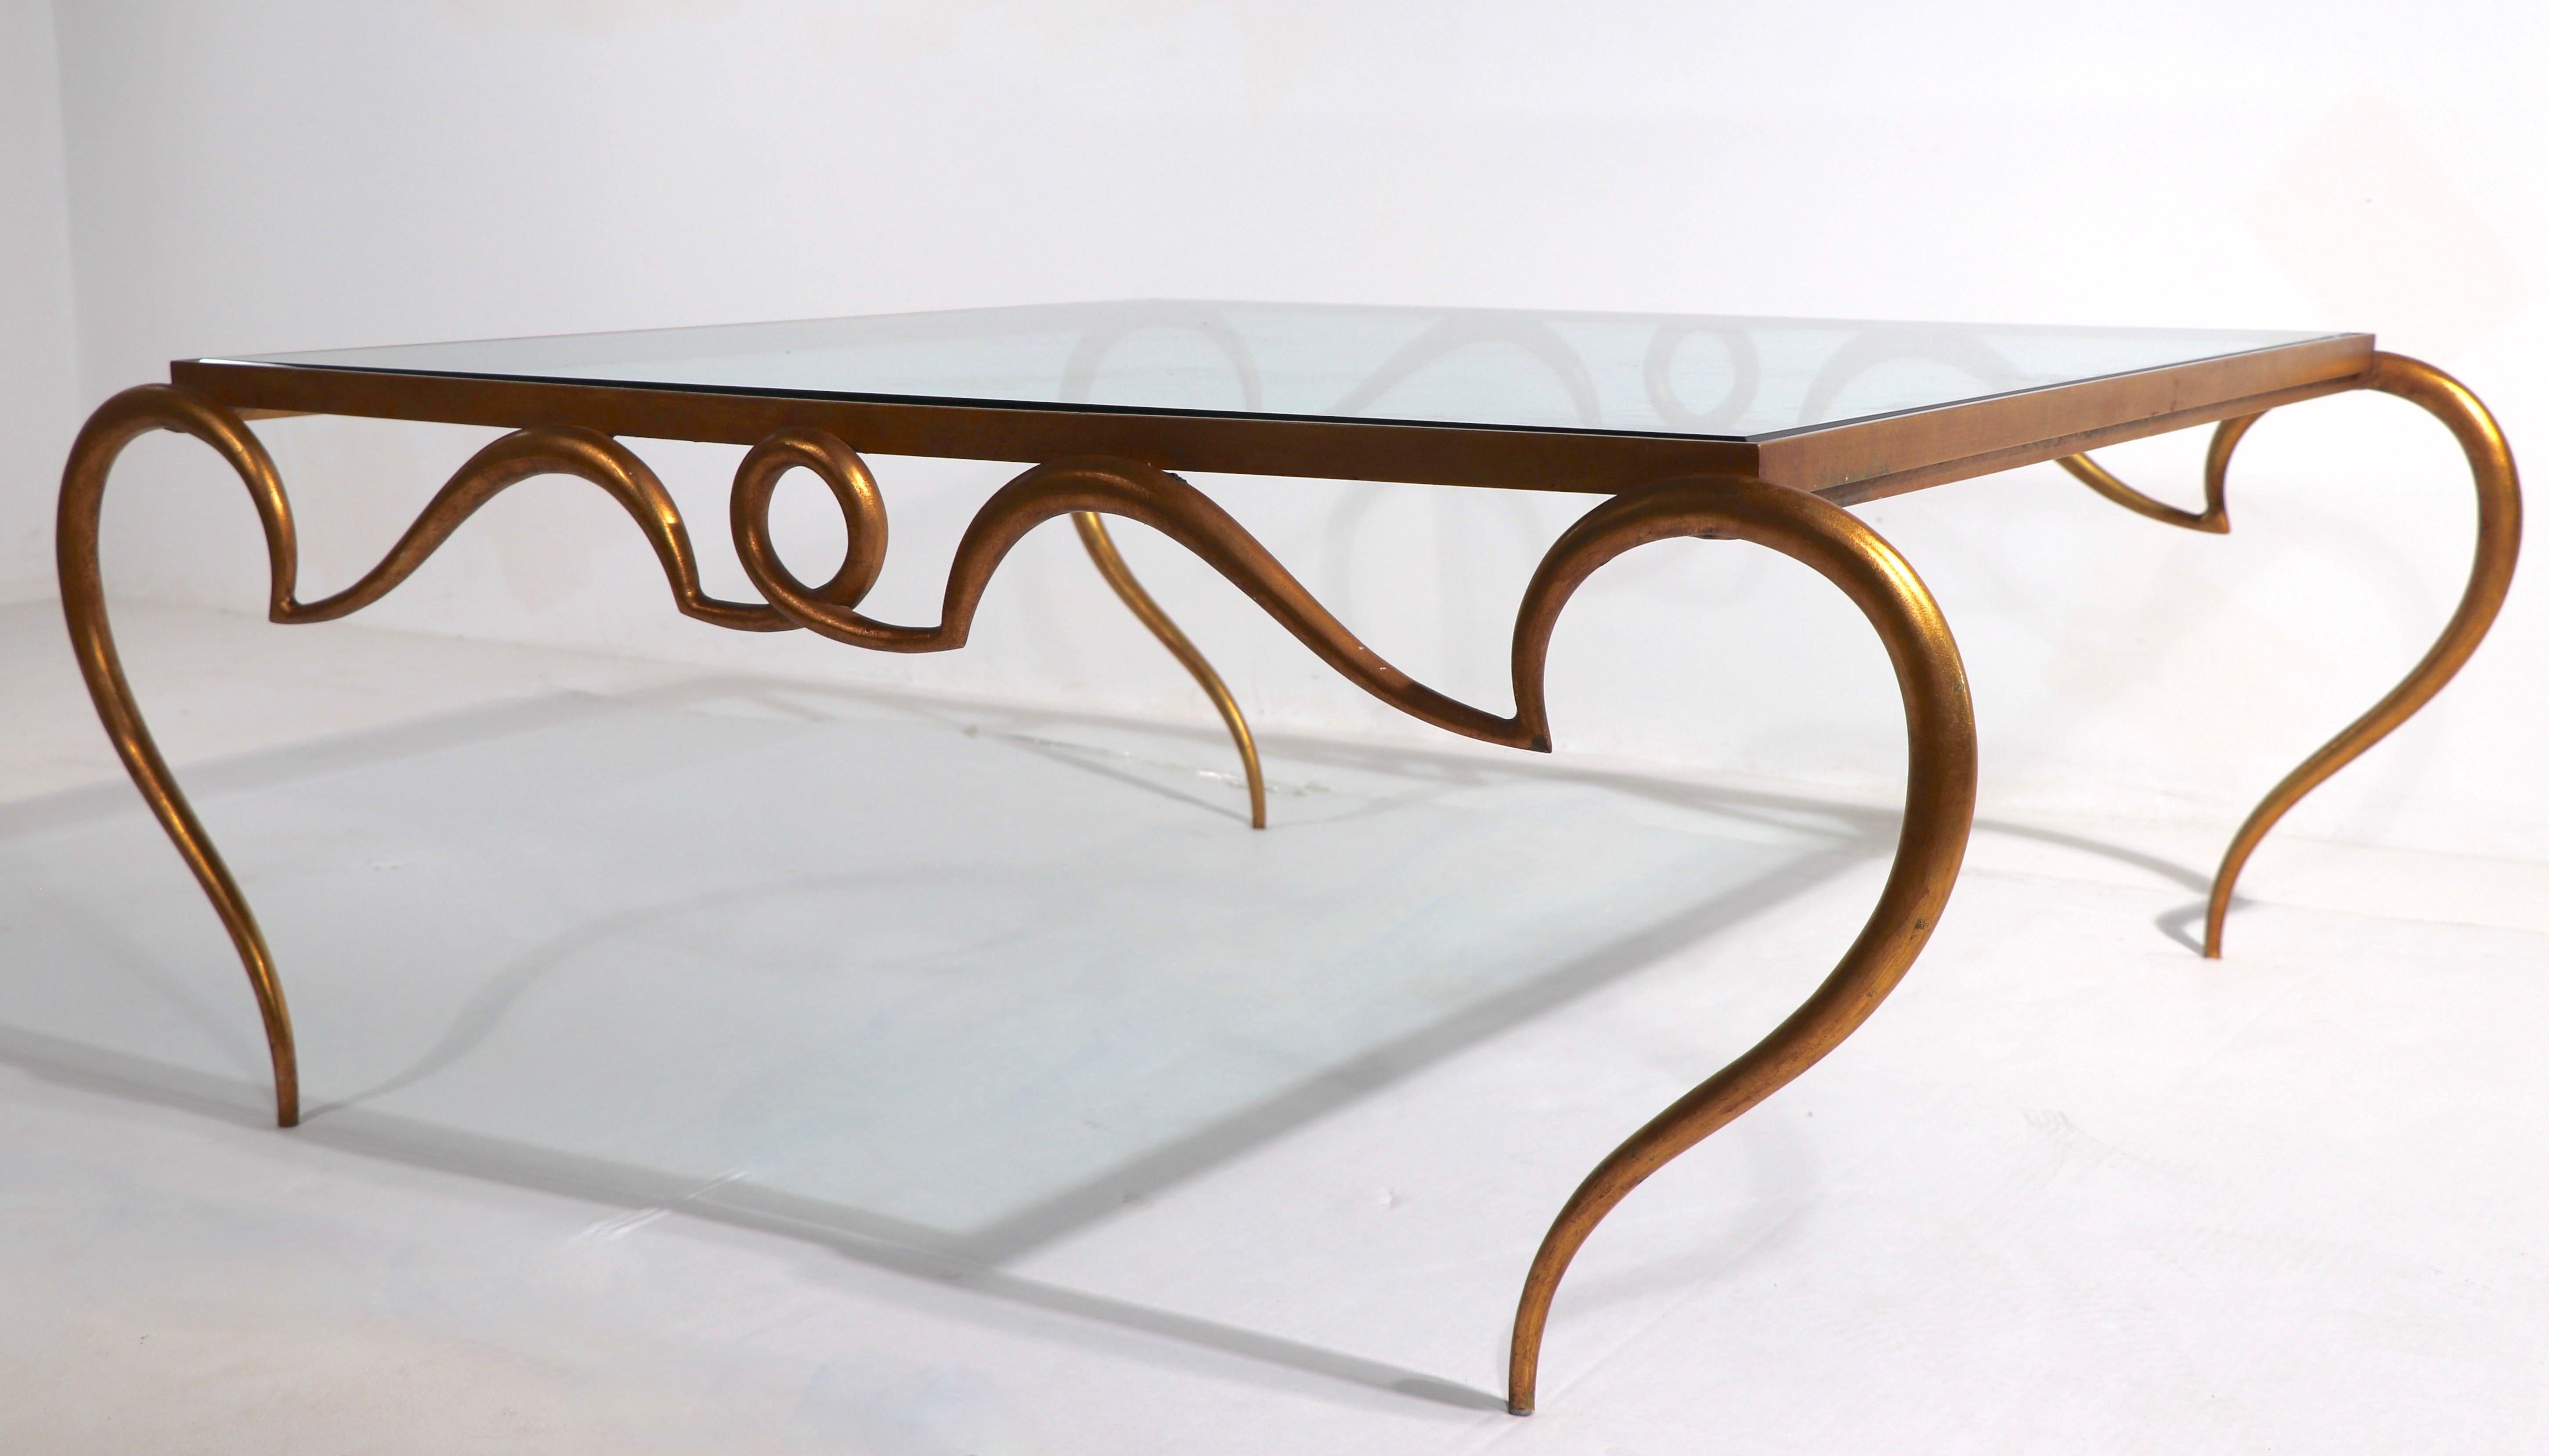 Faux Gilt Metal Scrollwork and Glass Coffee Table att. to Rene Drouet For Sale 6